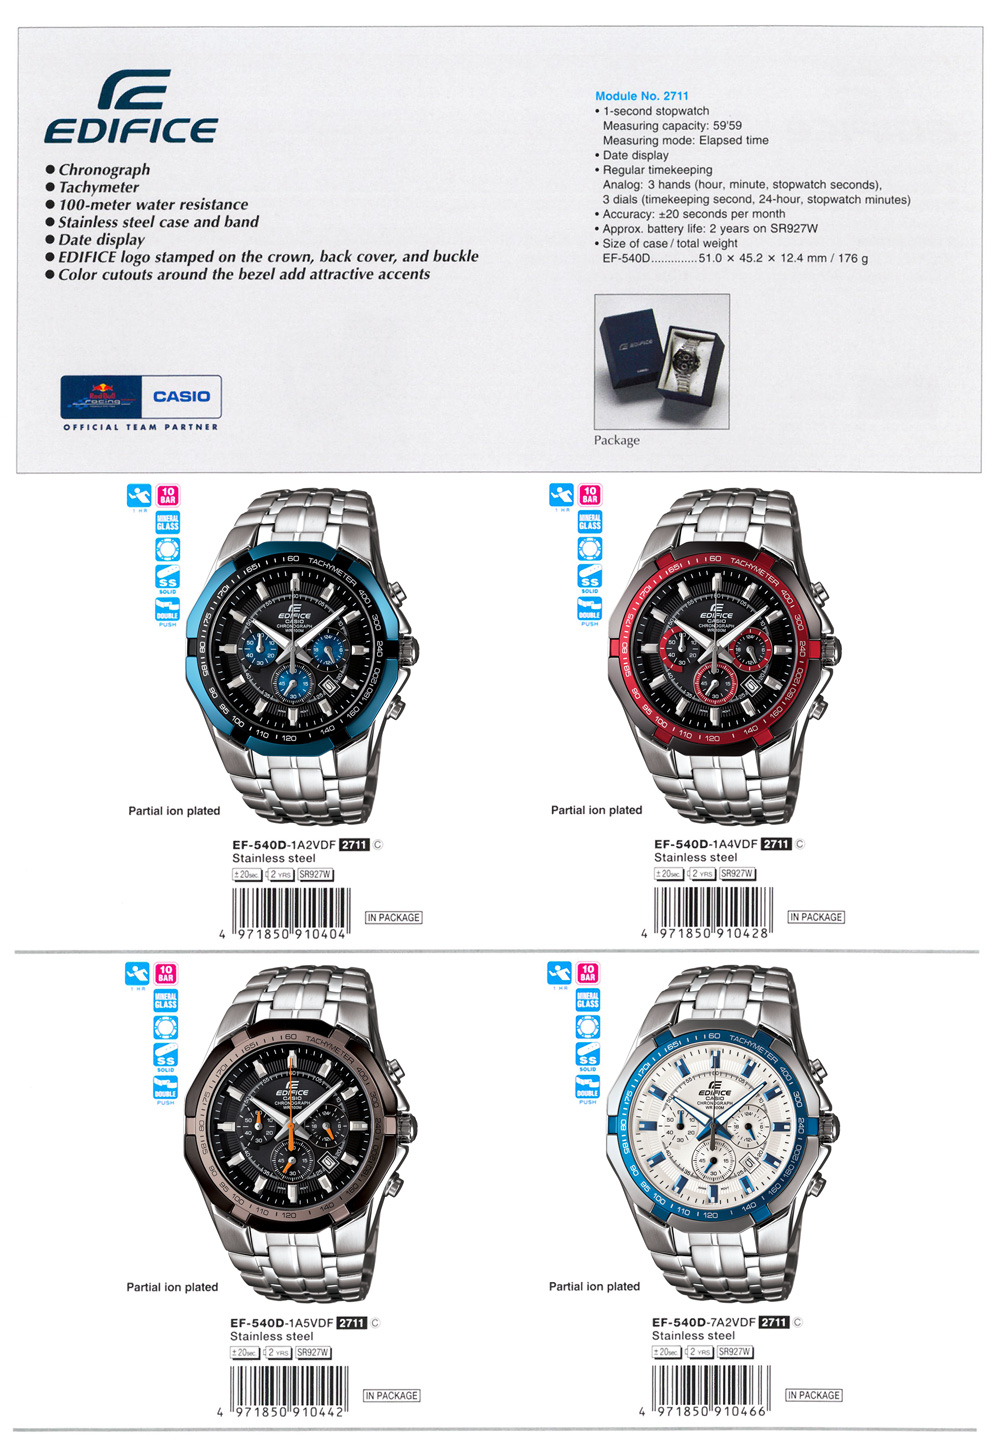 Watch, Edifice, Chronograph, tachymeter, 100-meter water resistance, date display, color cutout, EF-540D-1A2V, EF-540D-1A4V, EF-540D-1A5V, EF-540D-7A2V